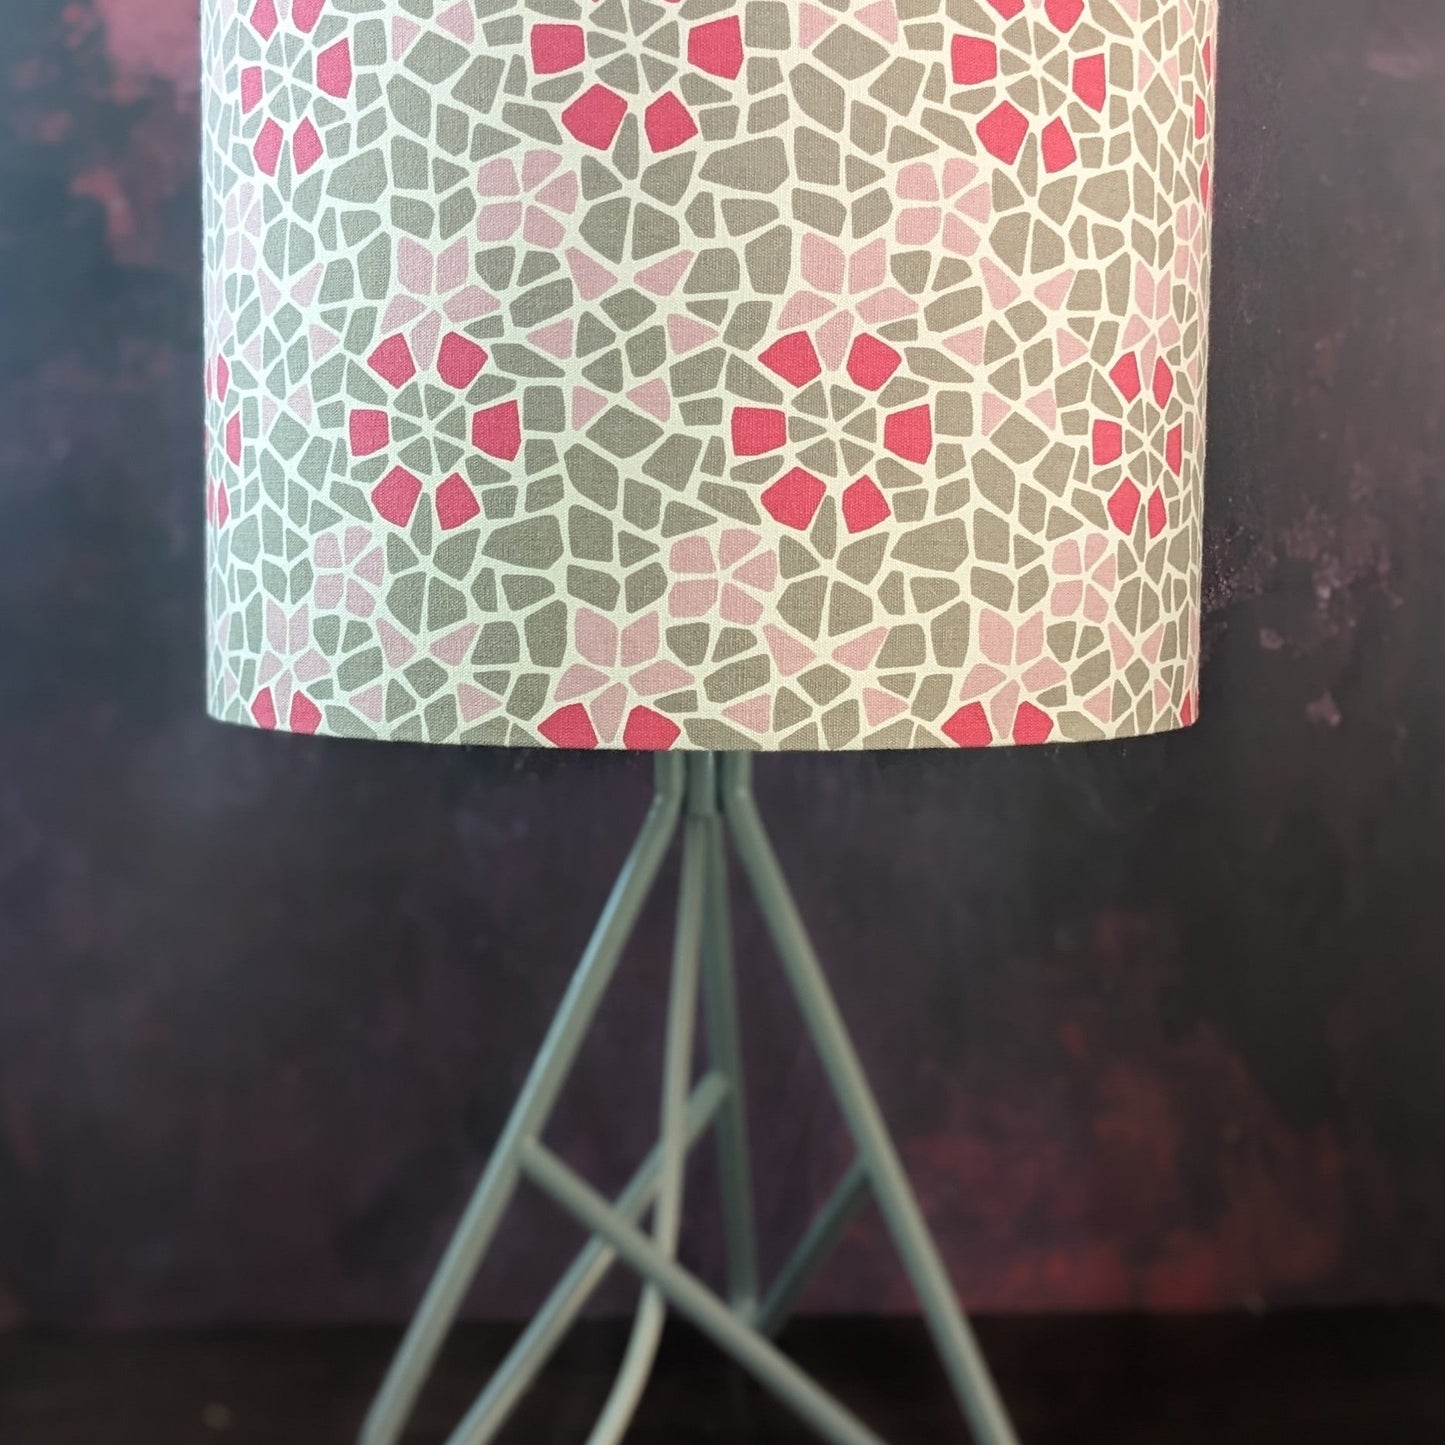 SECONDS Drum Lampshade: geometric pink grey abstract tiles